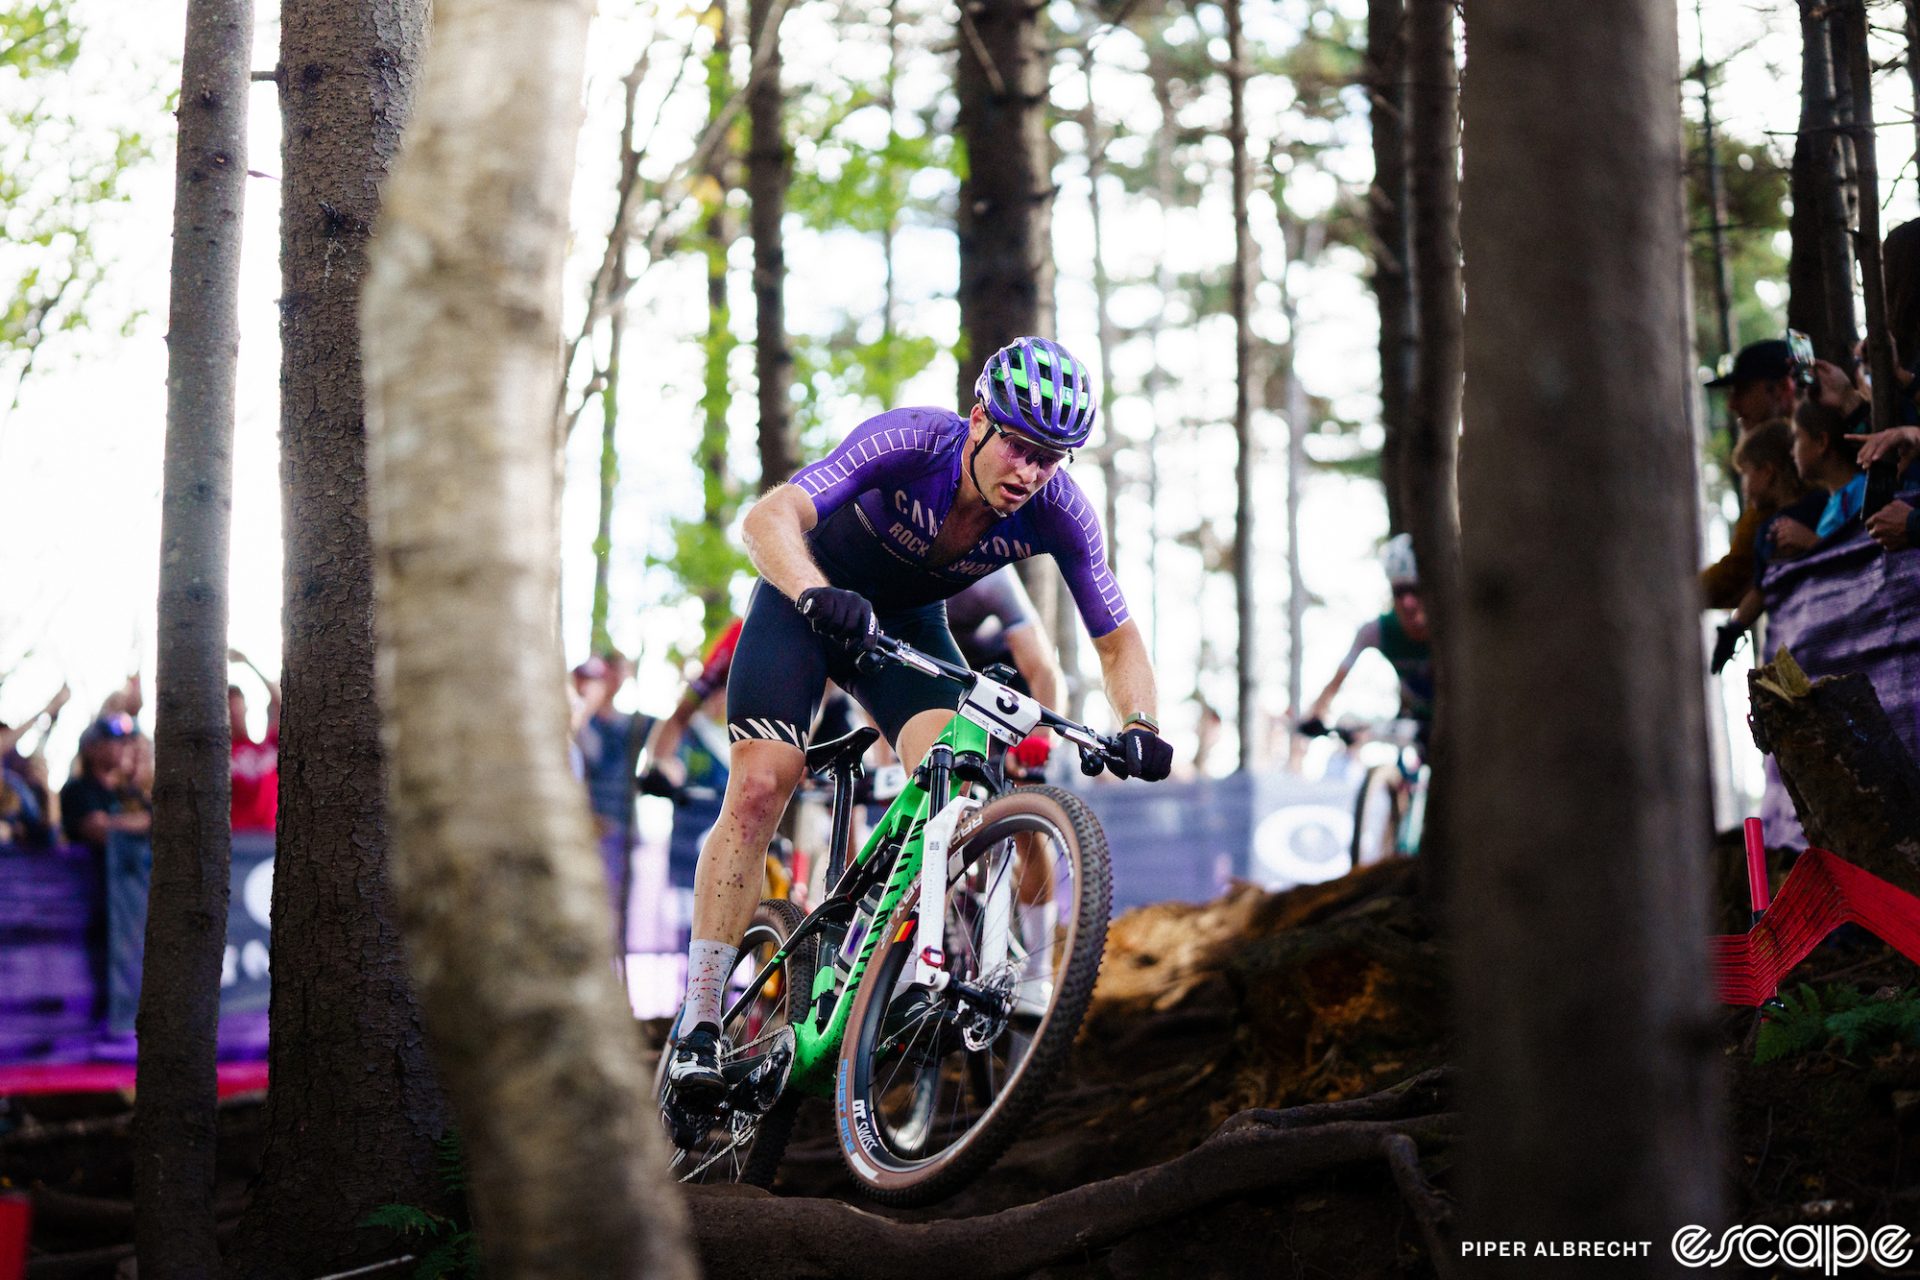 Luca Schwarzbauer descends a rooty section in a World Cup race. The German is wearing the distinctive purple jersey of his Canyon-CLLCTV team and is laser-focused on the drop he's about to take.